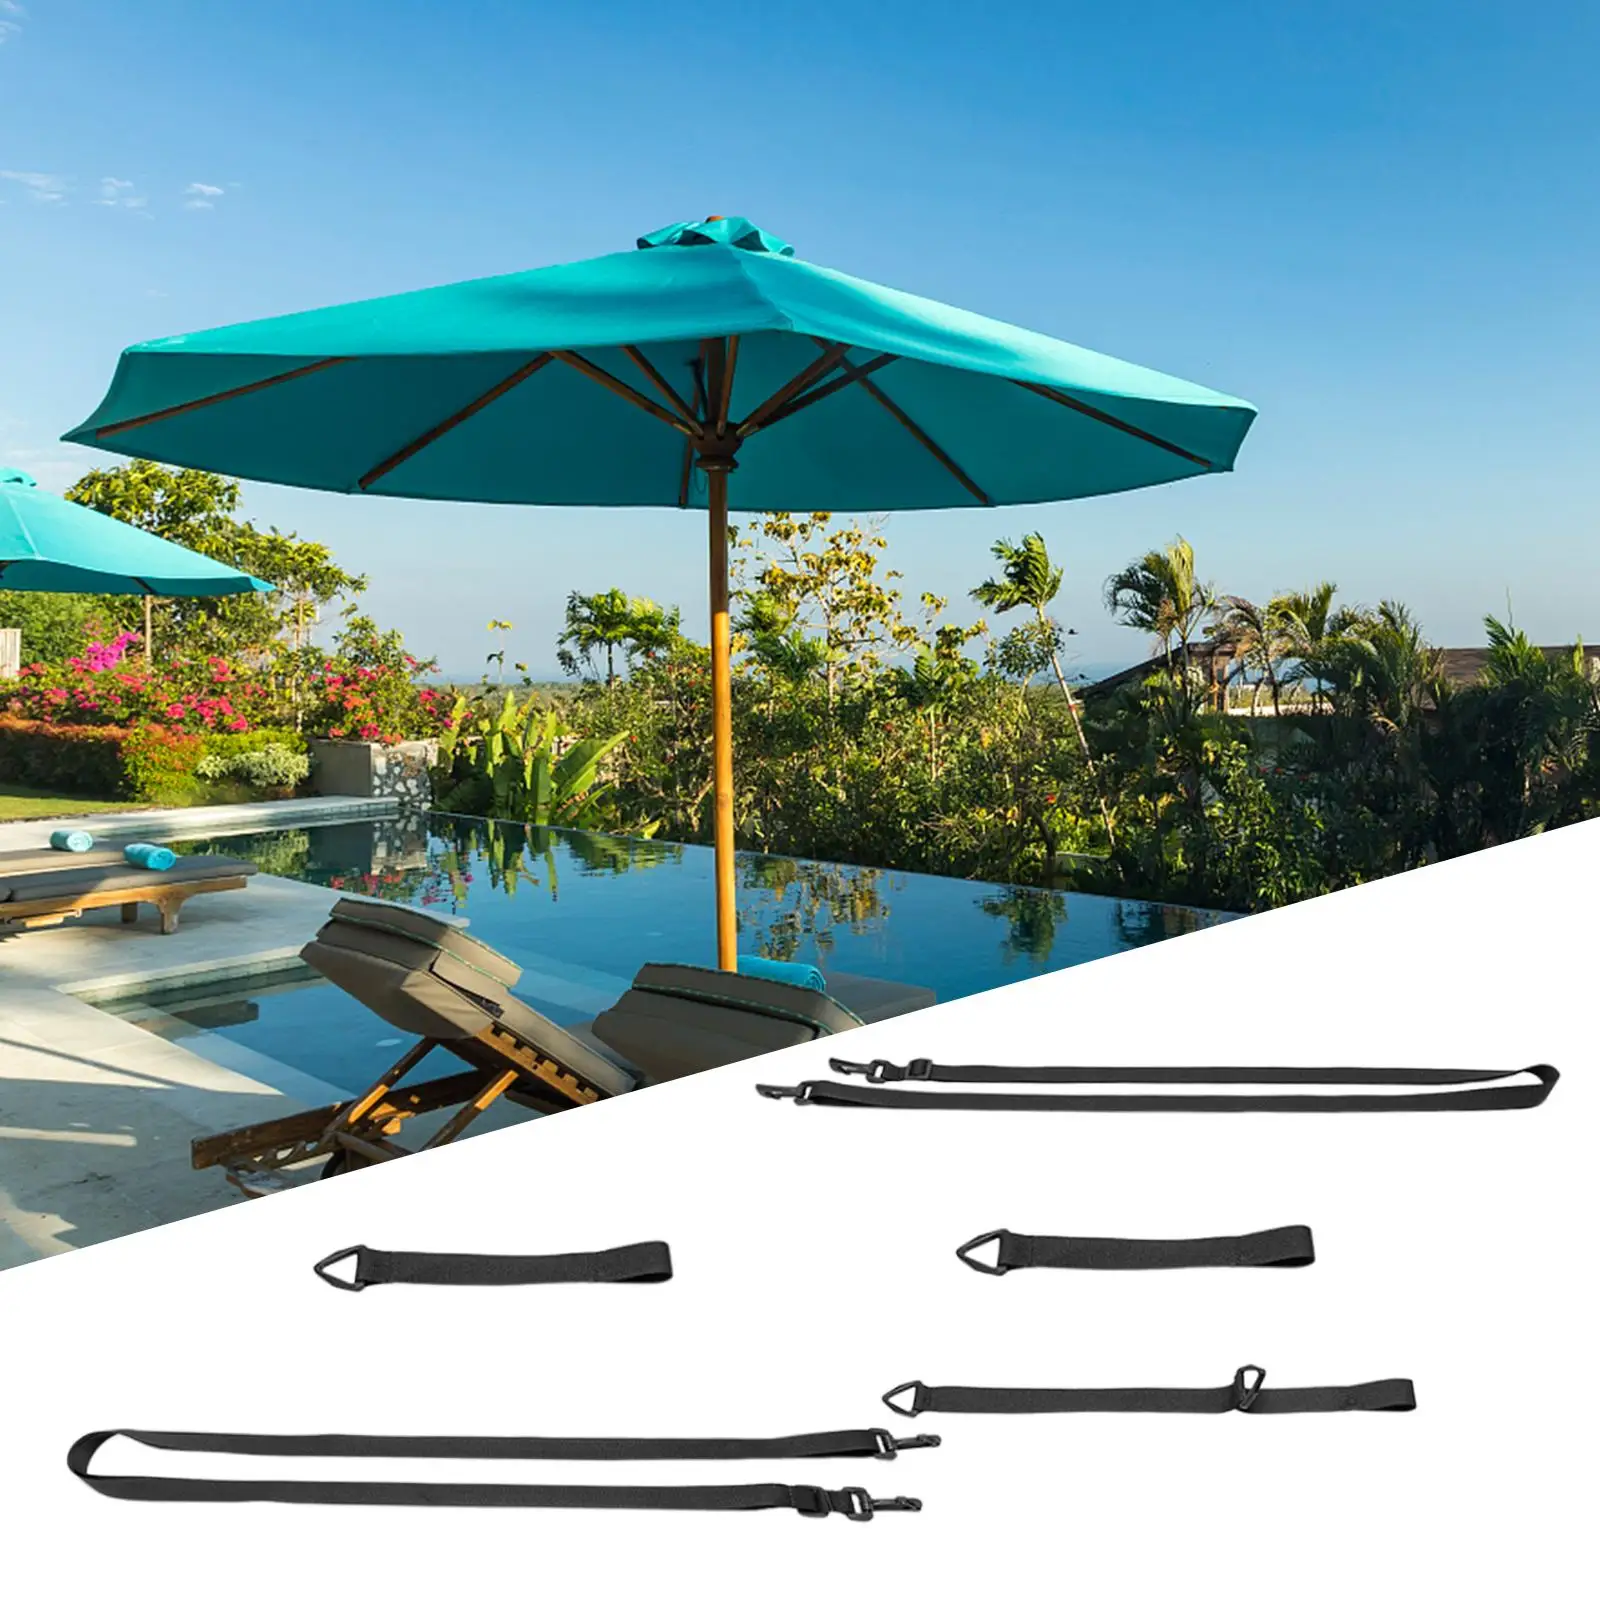 5x Patio Umbrella Strap Universal Windproof Reusable Professional Fixing Strap for Cantilever for Patio Yard Outdoor Garden